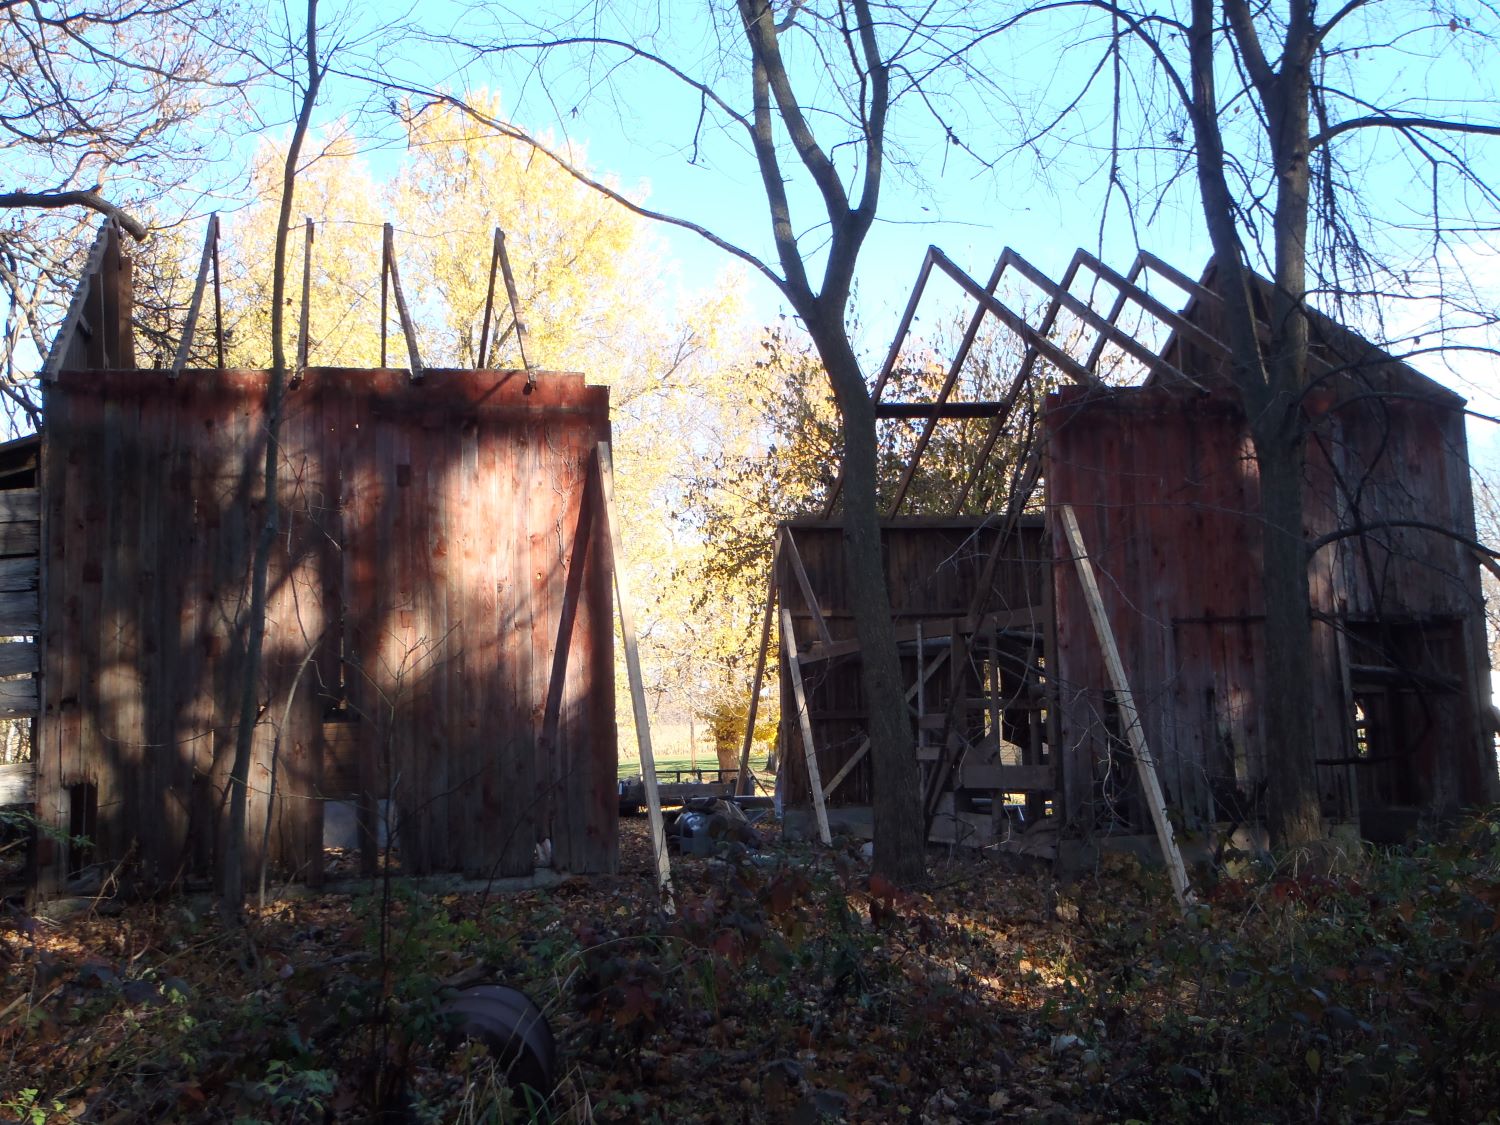 Starting the deconstruction of a Michigan barn in order to repurpose the old wood